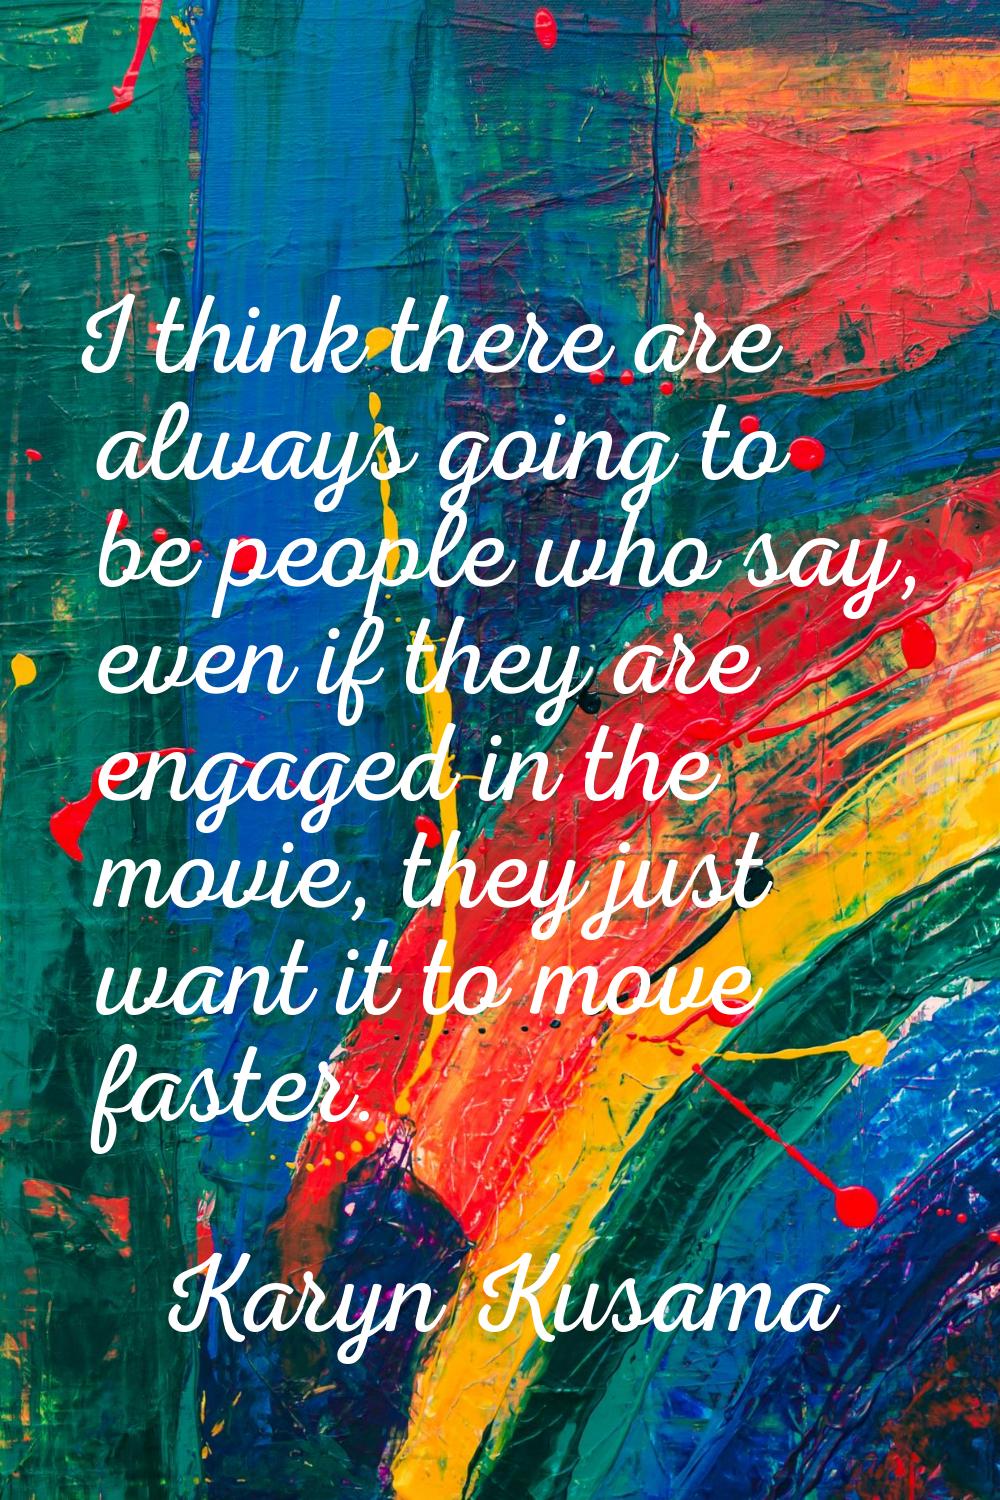 I think there are always going to be people who say, even if they are engaged in the movie, they ju